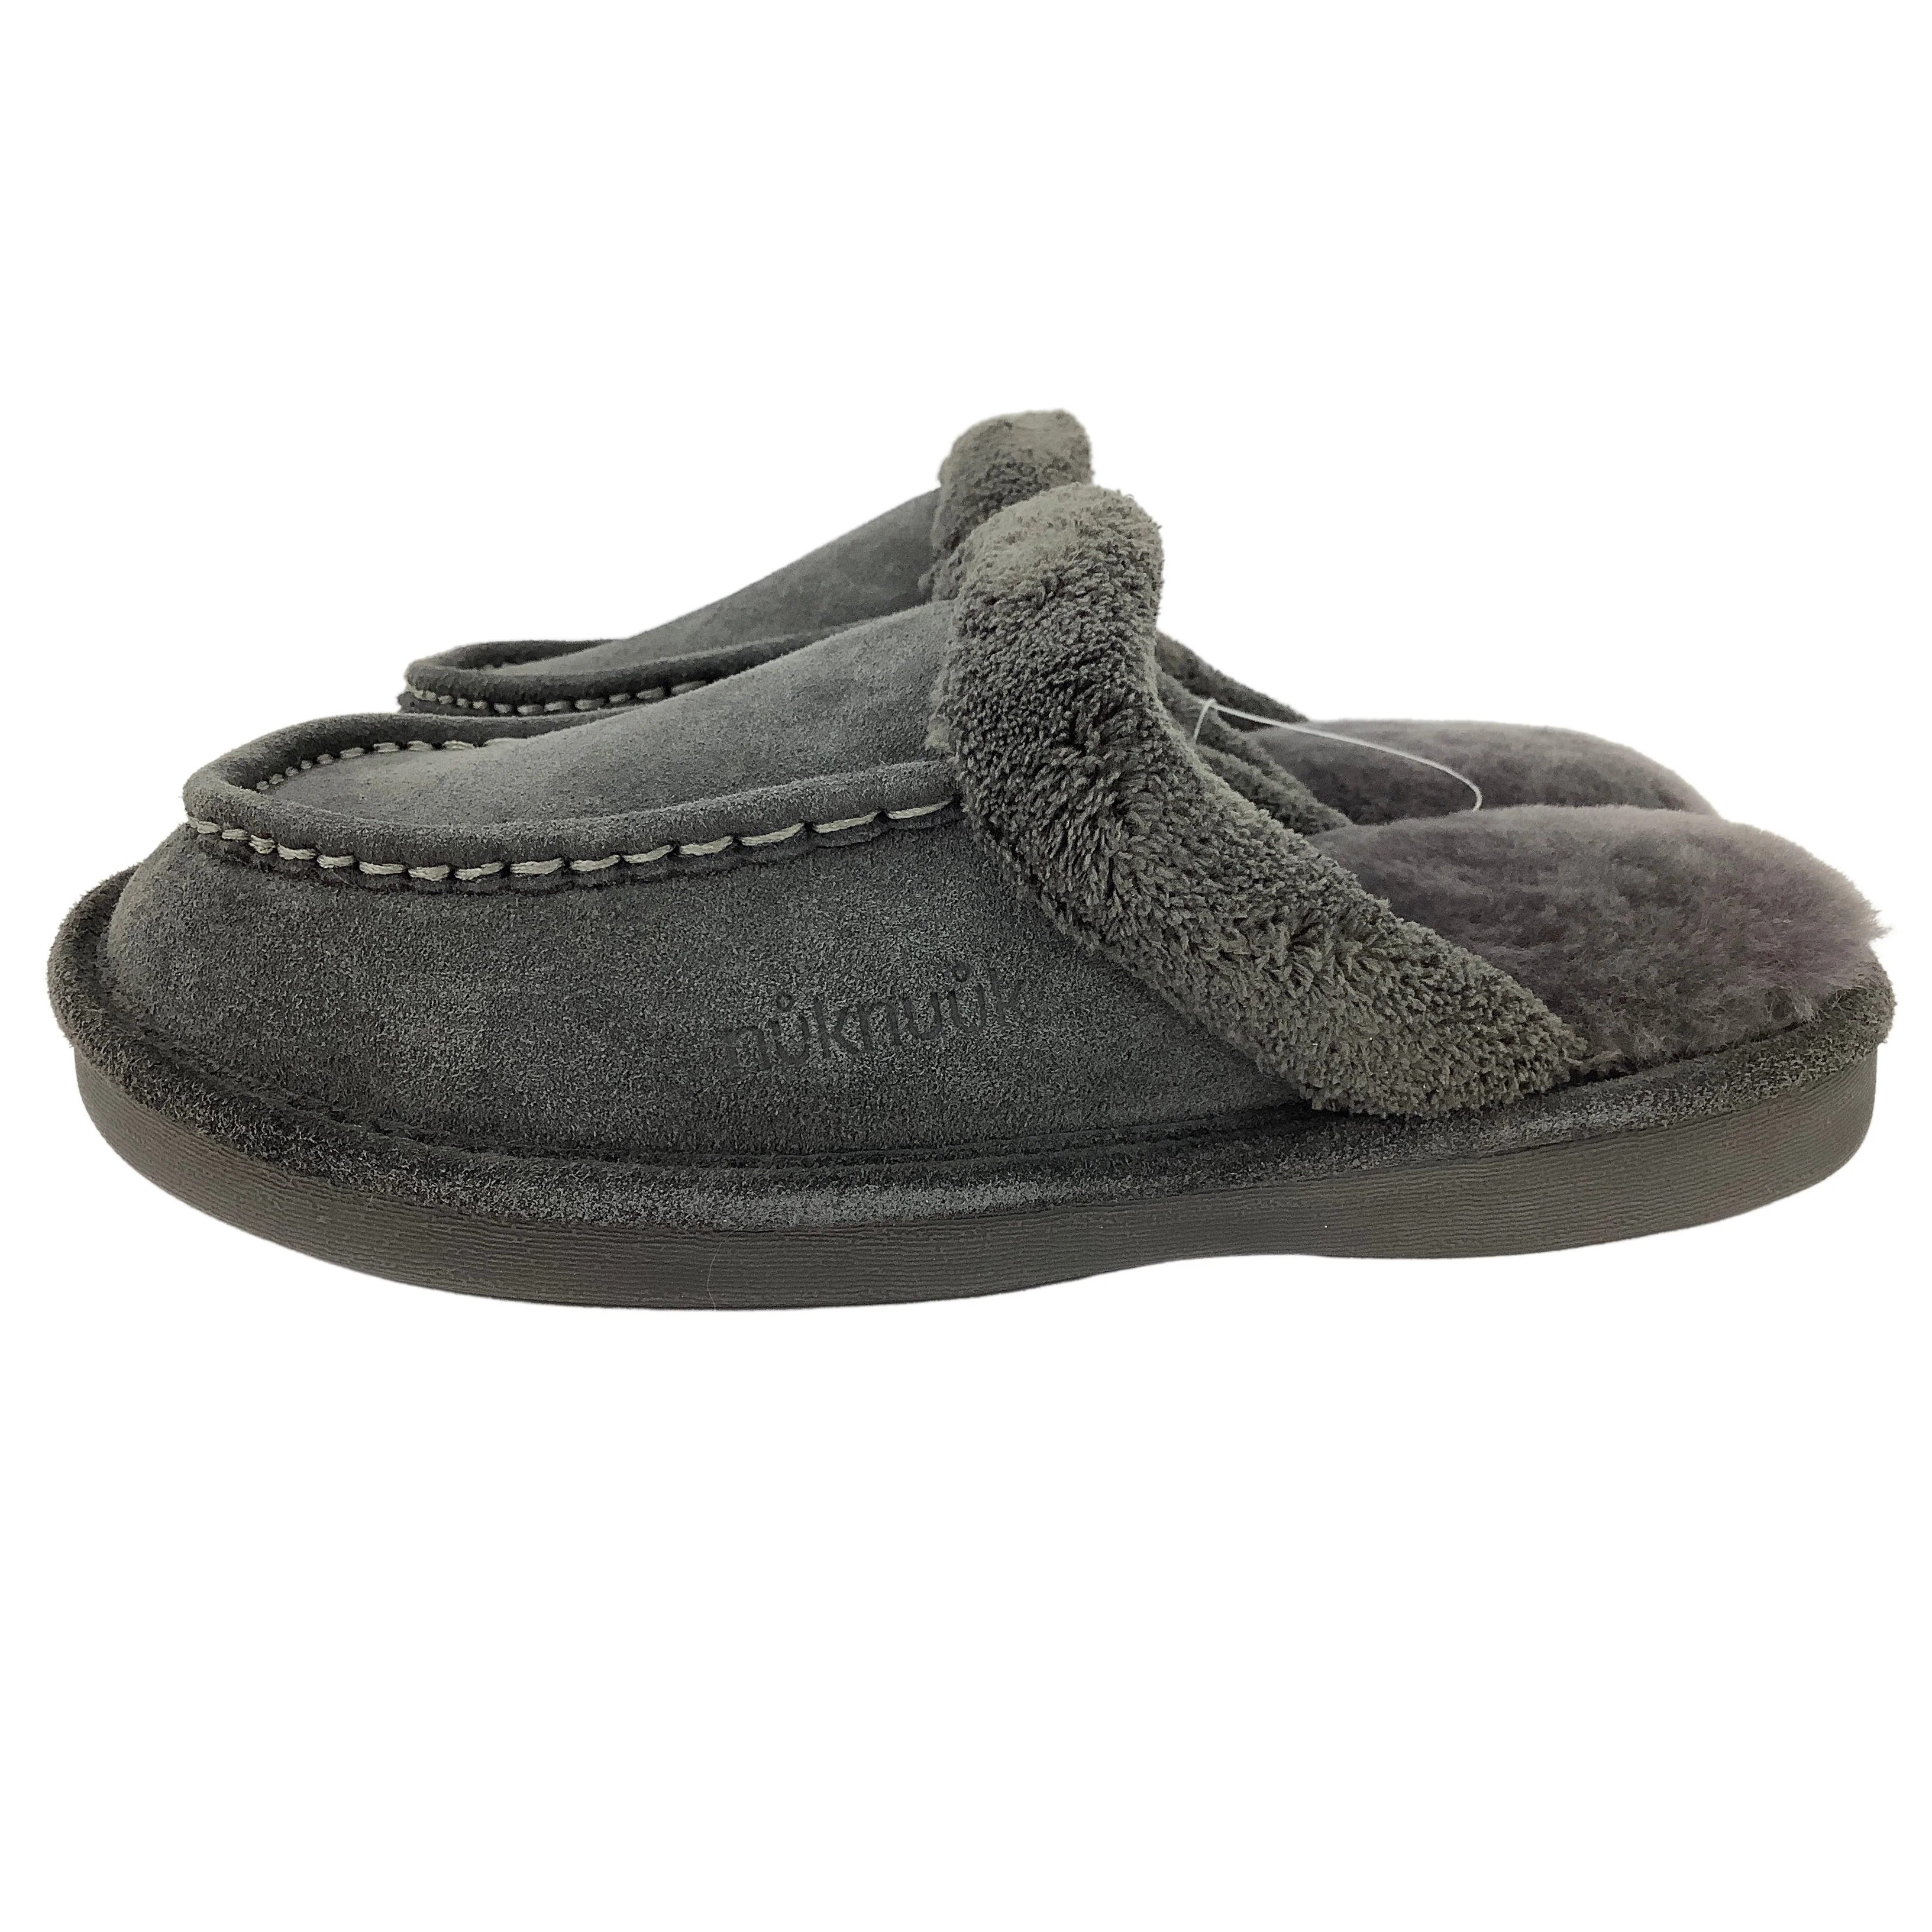 NukNuuk Men's Slippers / Leather / Grey / Size 10